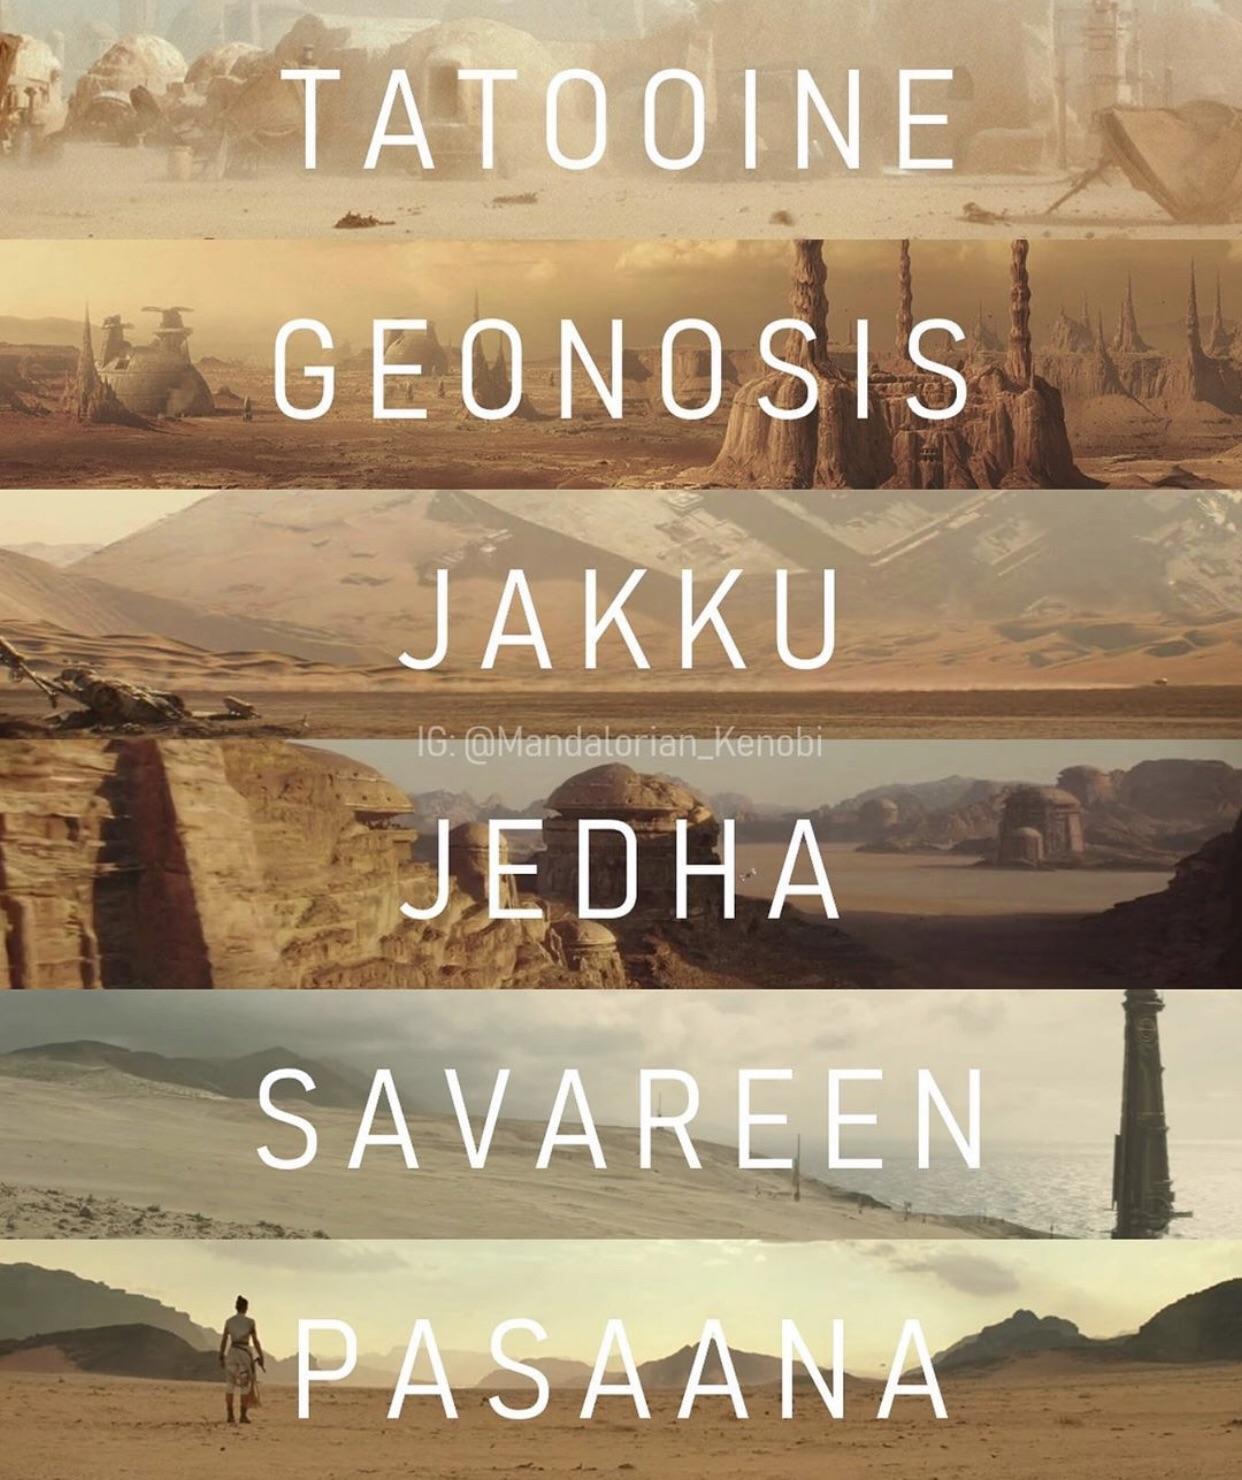 What is the name of the desert planet in Star Wars?